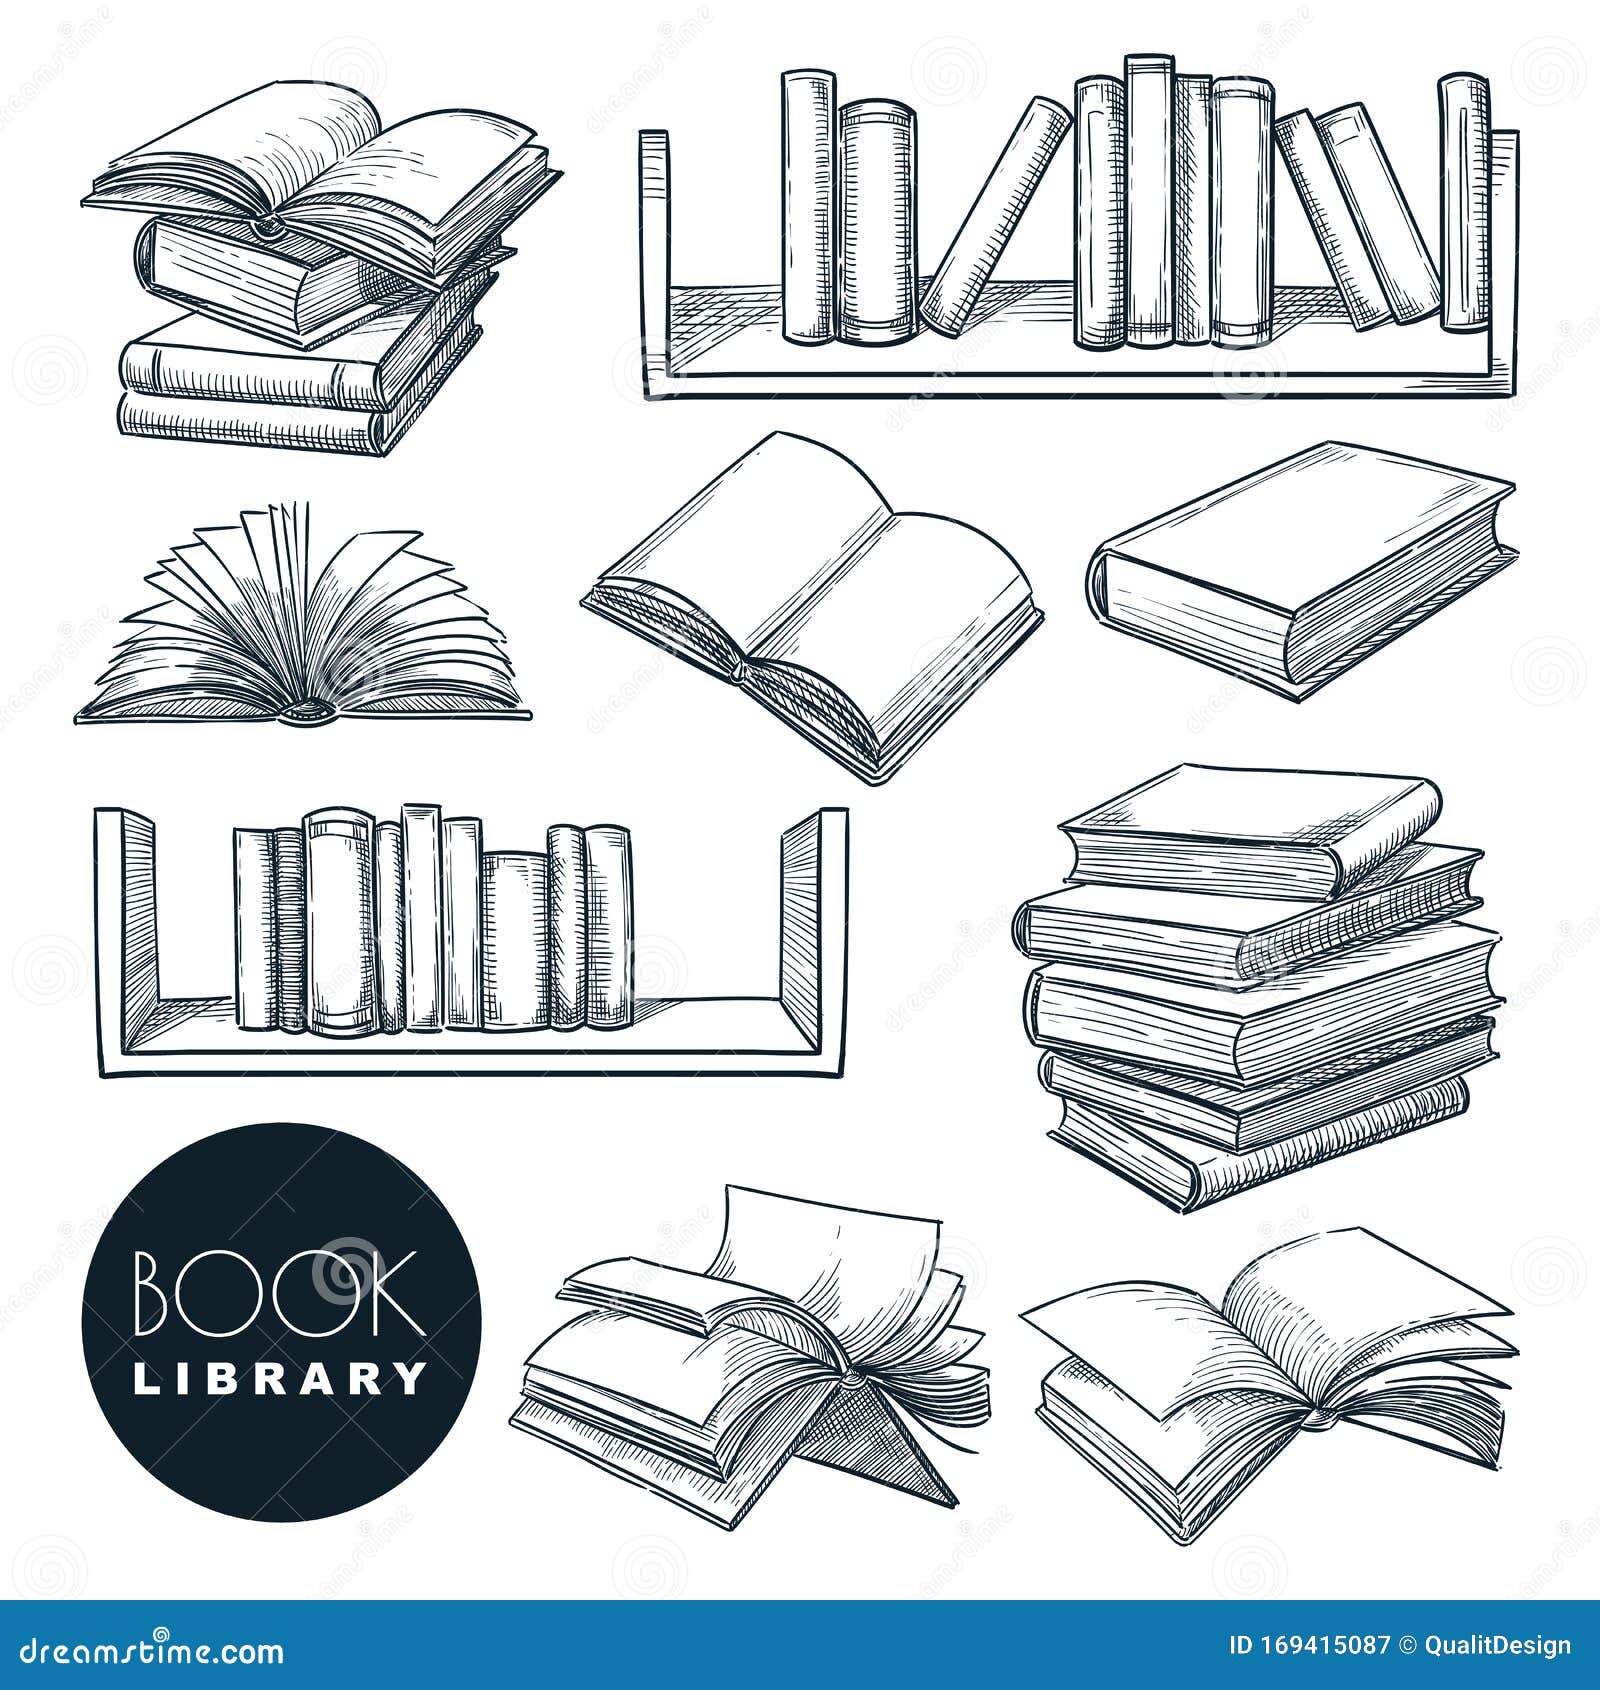 11100 Open Book Sketch Stock Photos Pictures  RoyaltyFree Images   iStock